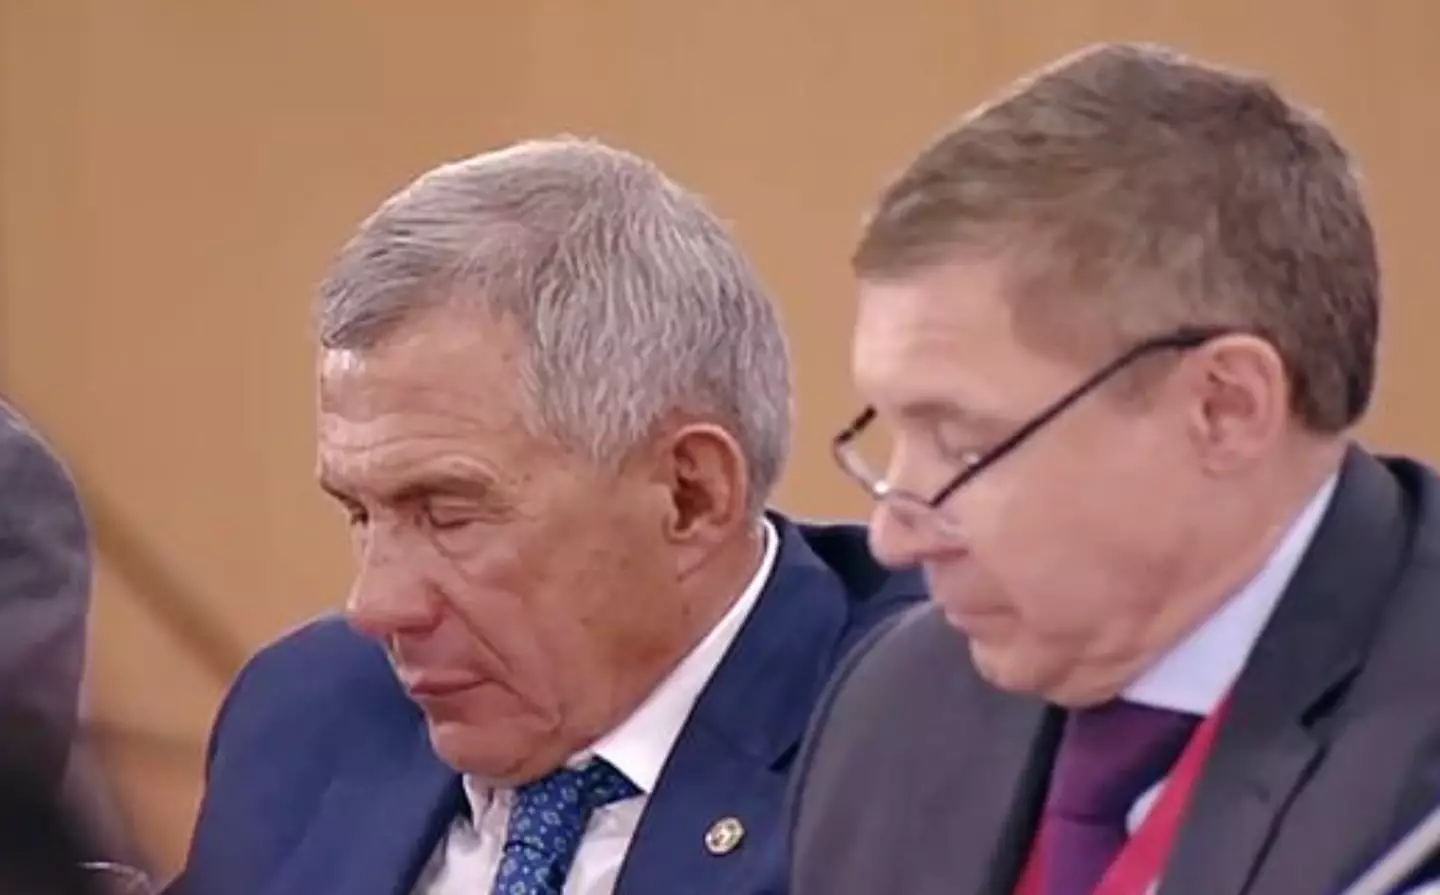 Putin wasnt the only one in need of a good kip at the meeting.